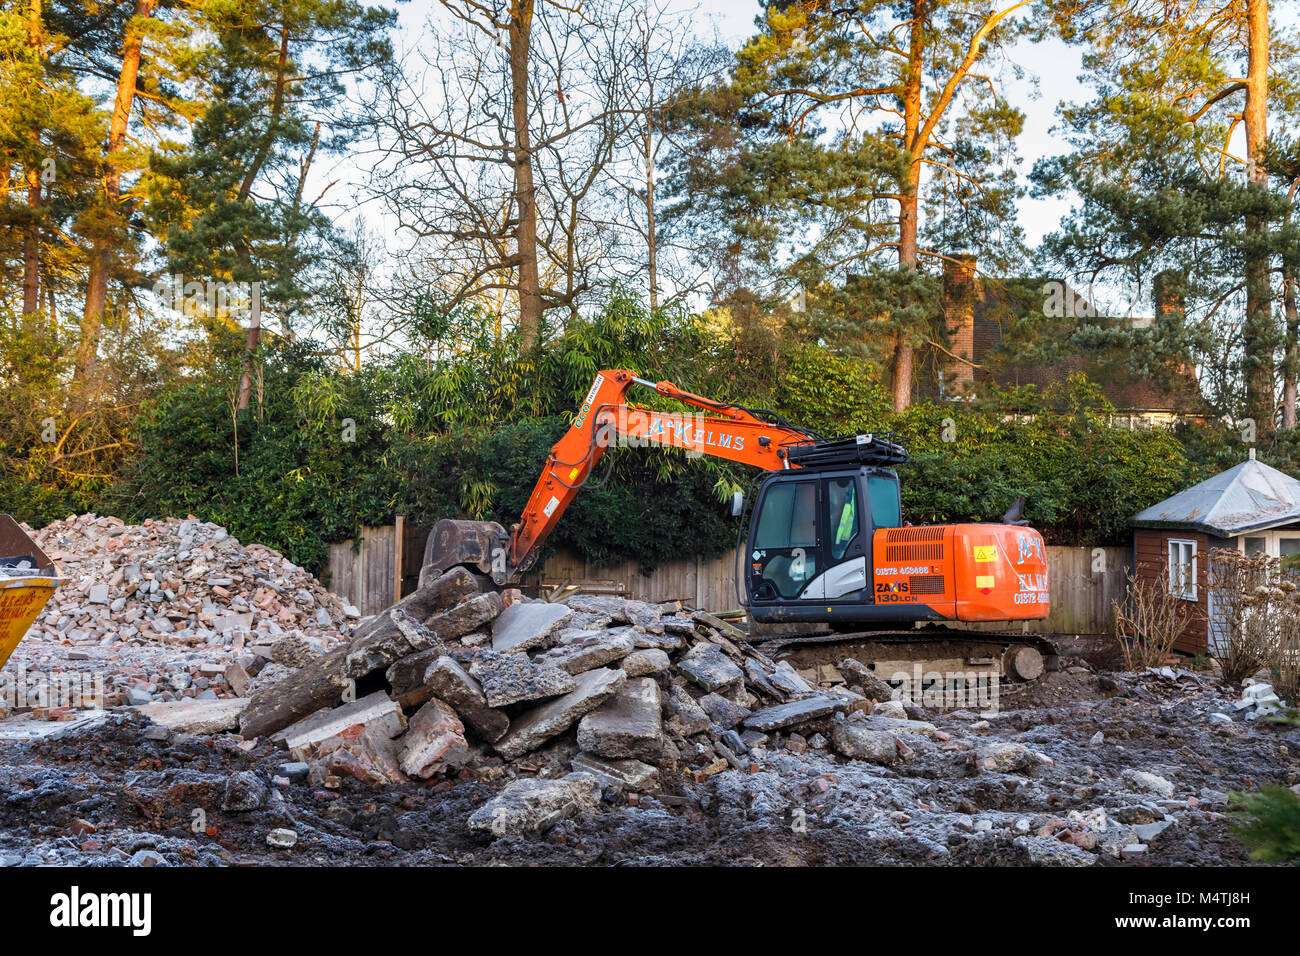 Construction site with orange heavy plant tracked mechanical excavator: remains of the demolition of a residential house prior to redevelopment Stock Photo